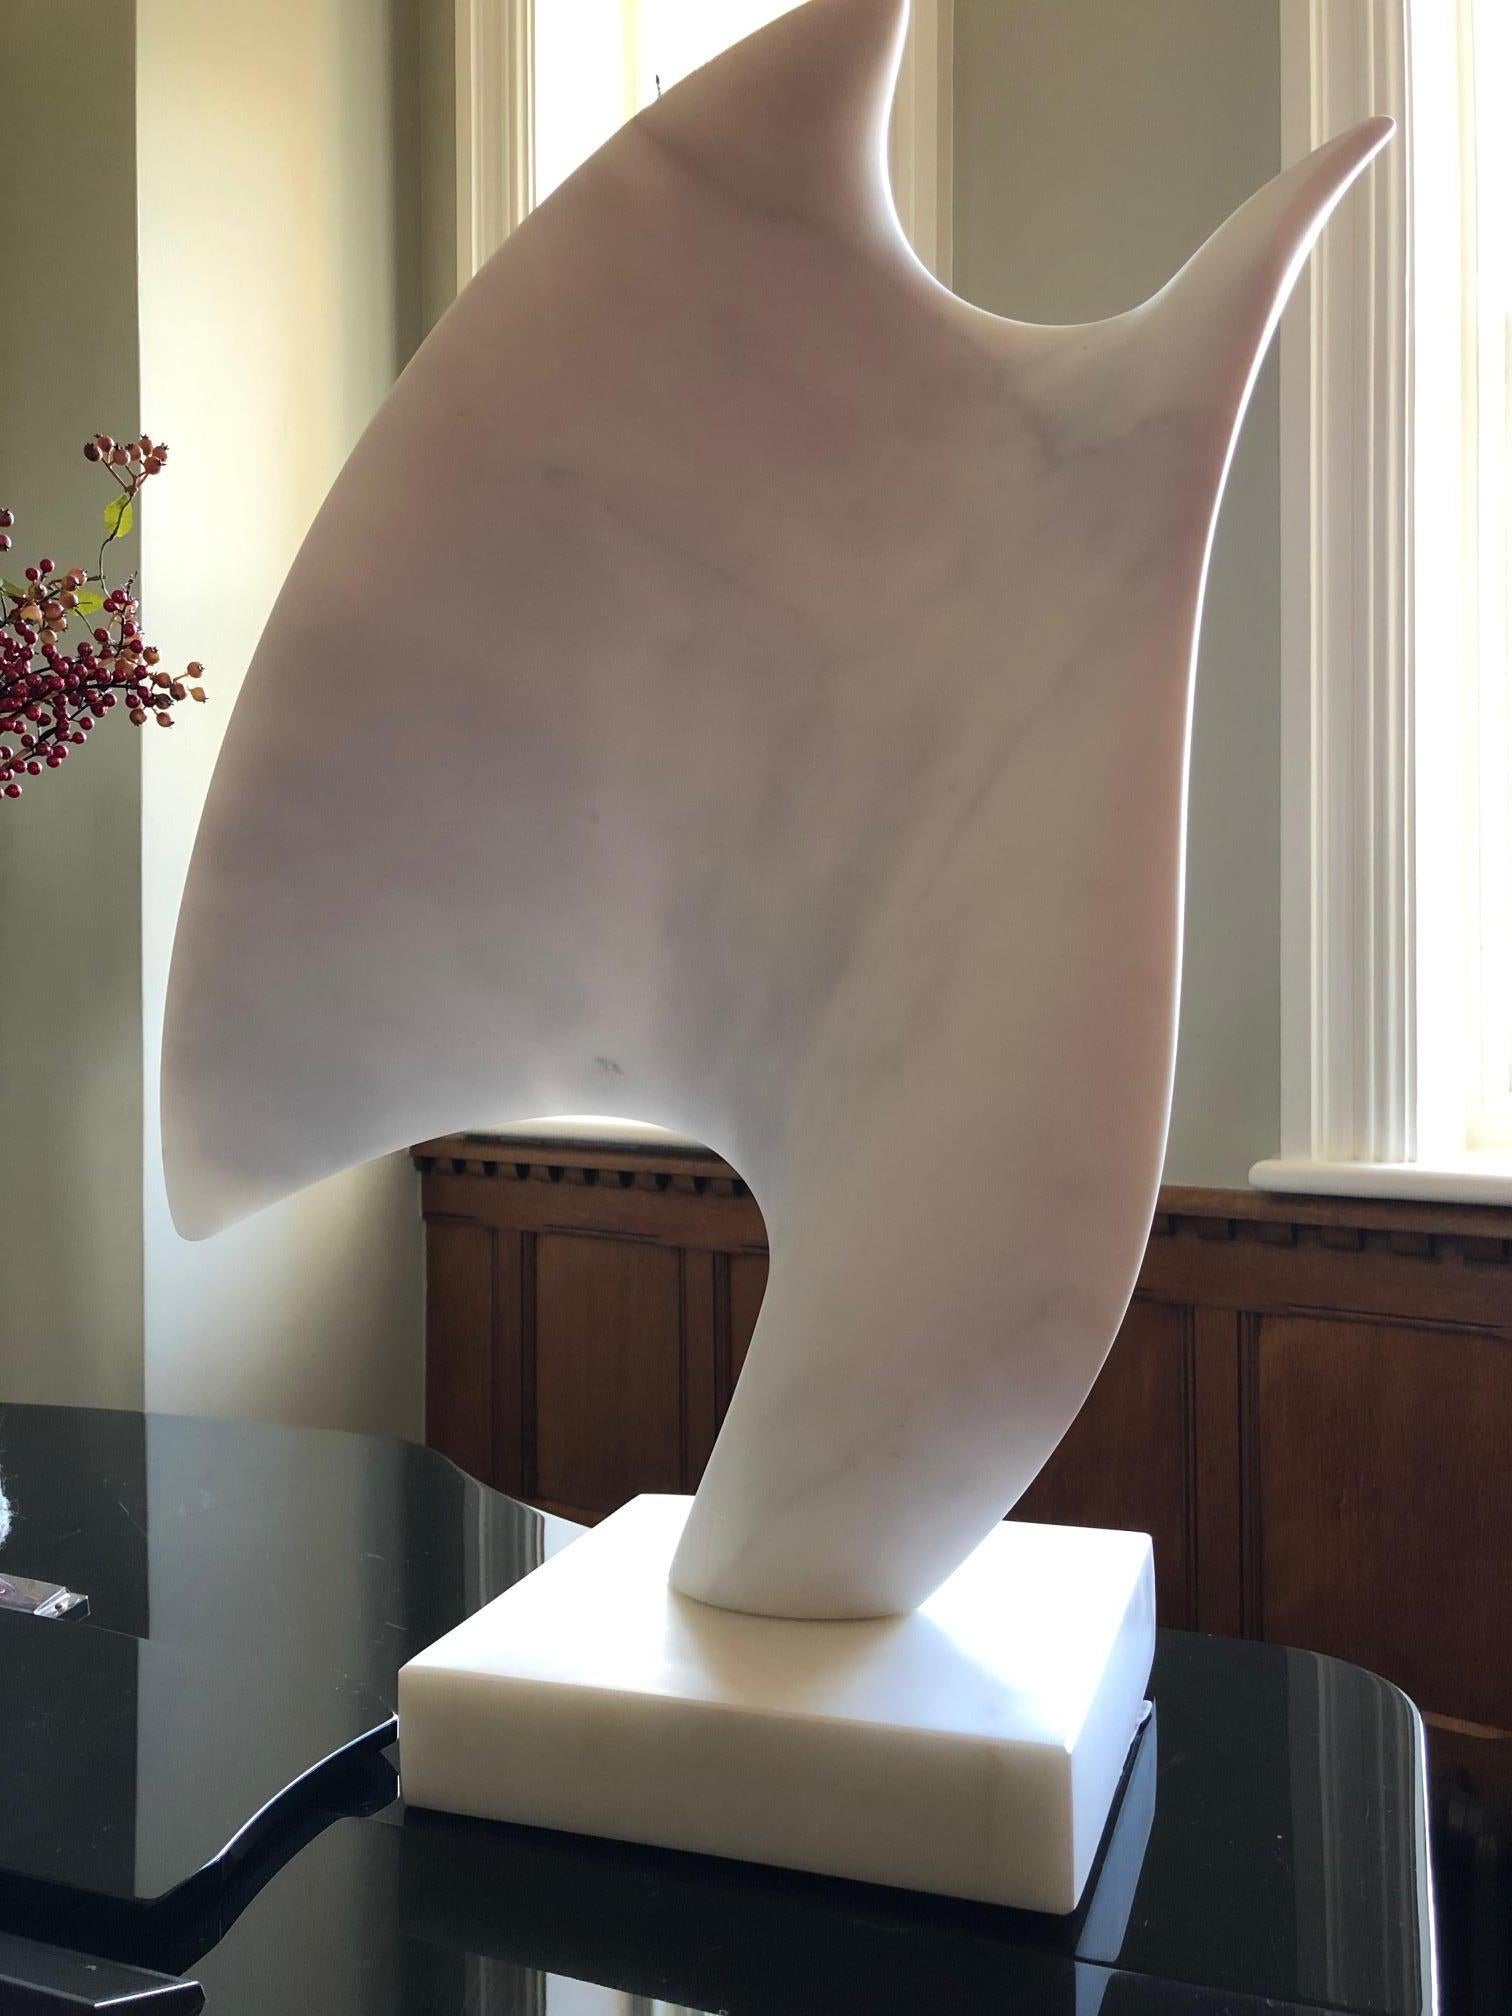 Ian Thomson Abstract Sculpture - Becoming -British Sculptor, Abstract, Marble, Italian Carrara, Philosophy, veins